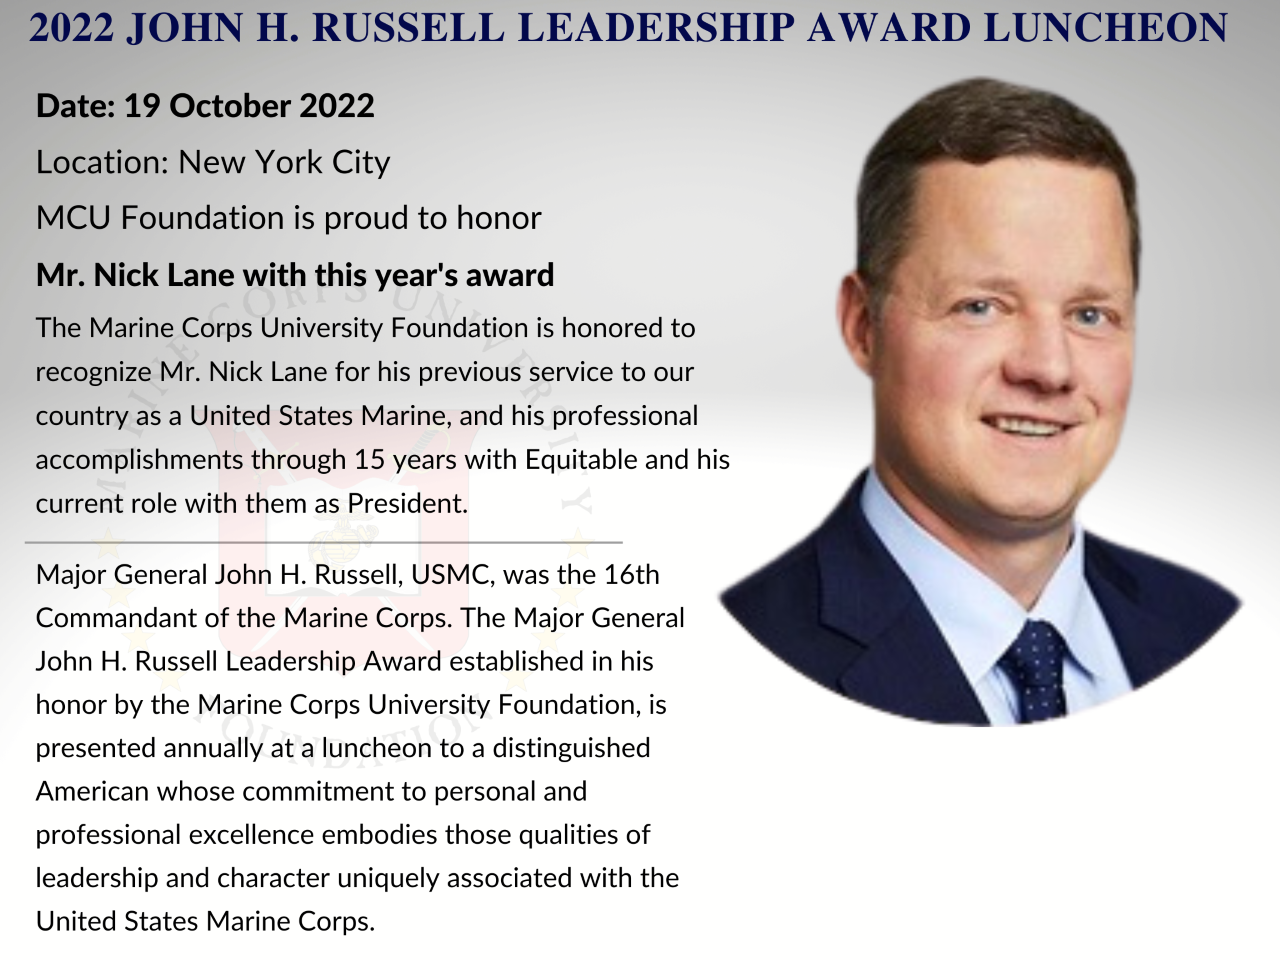 2022 Russell Leadership Award Luncheon to be held October 19, 2022